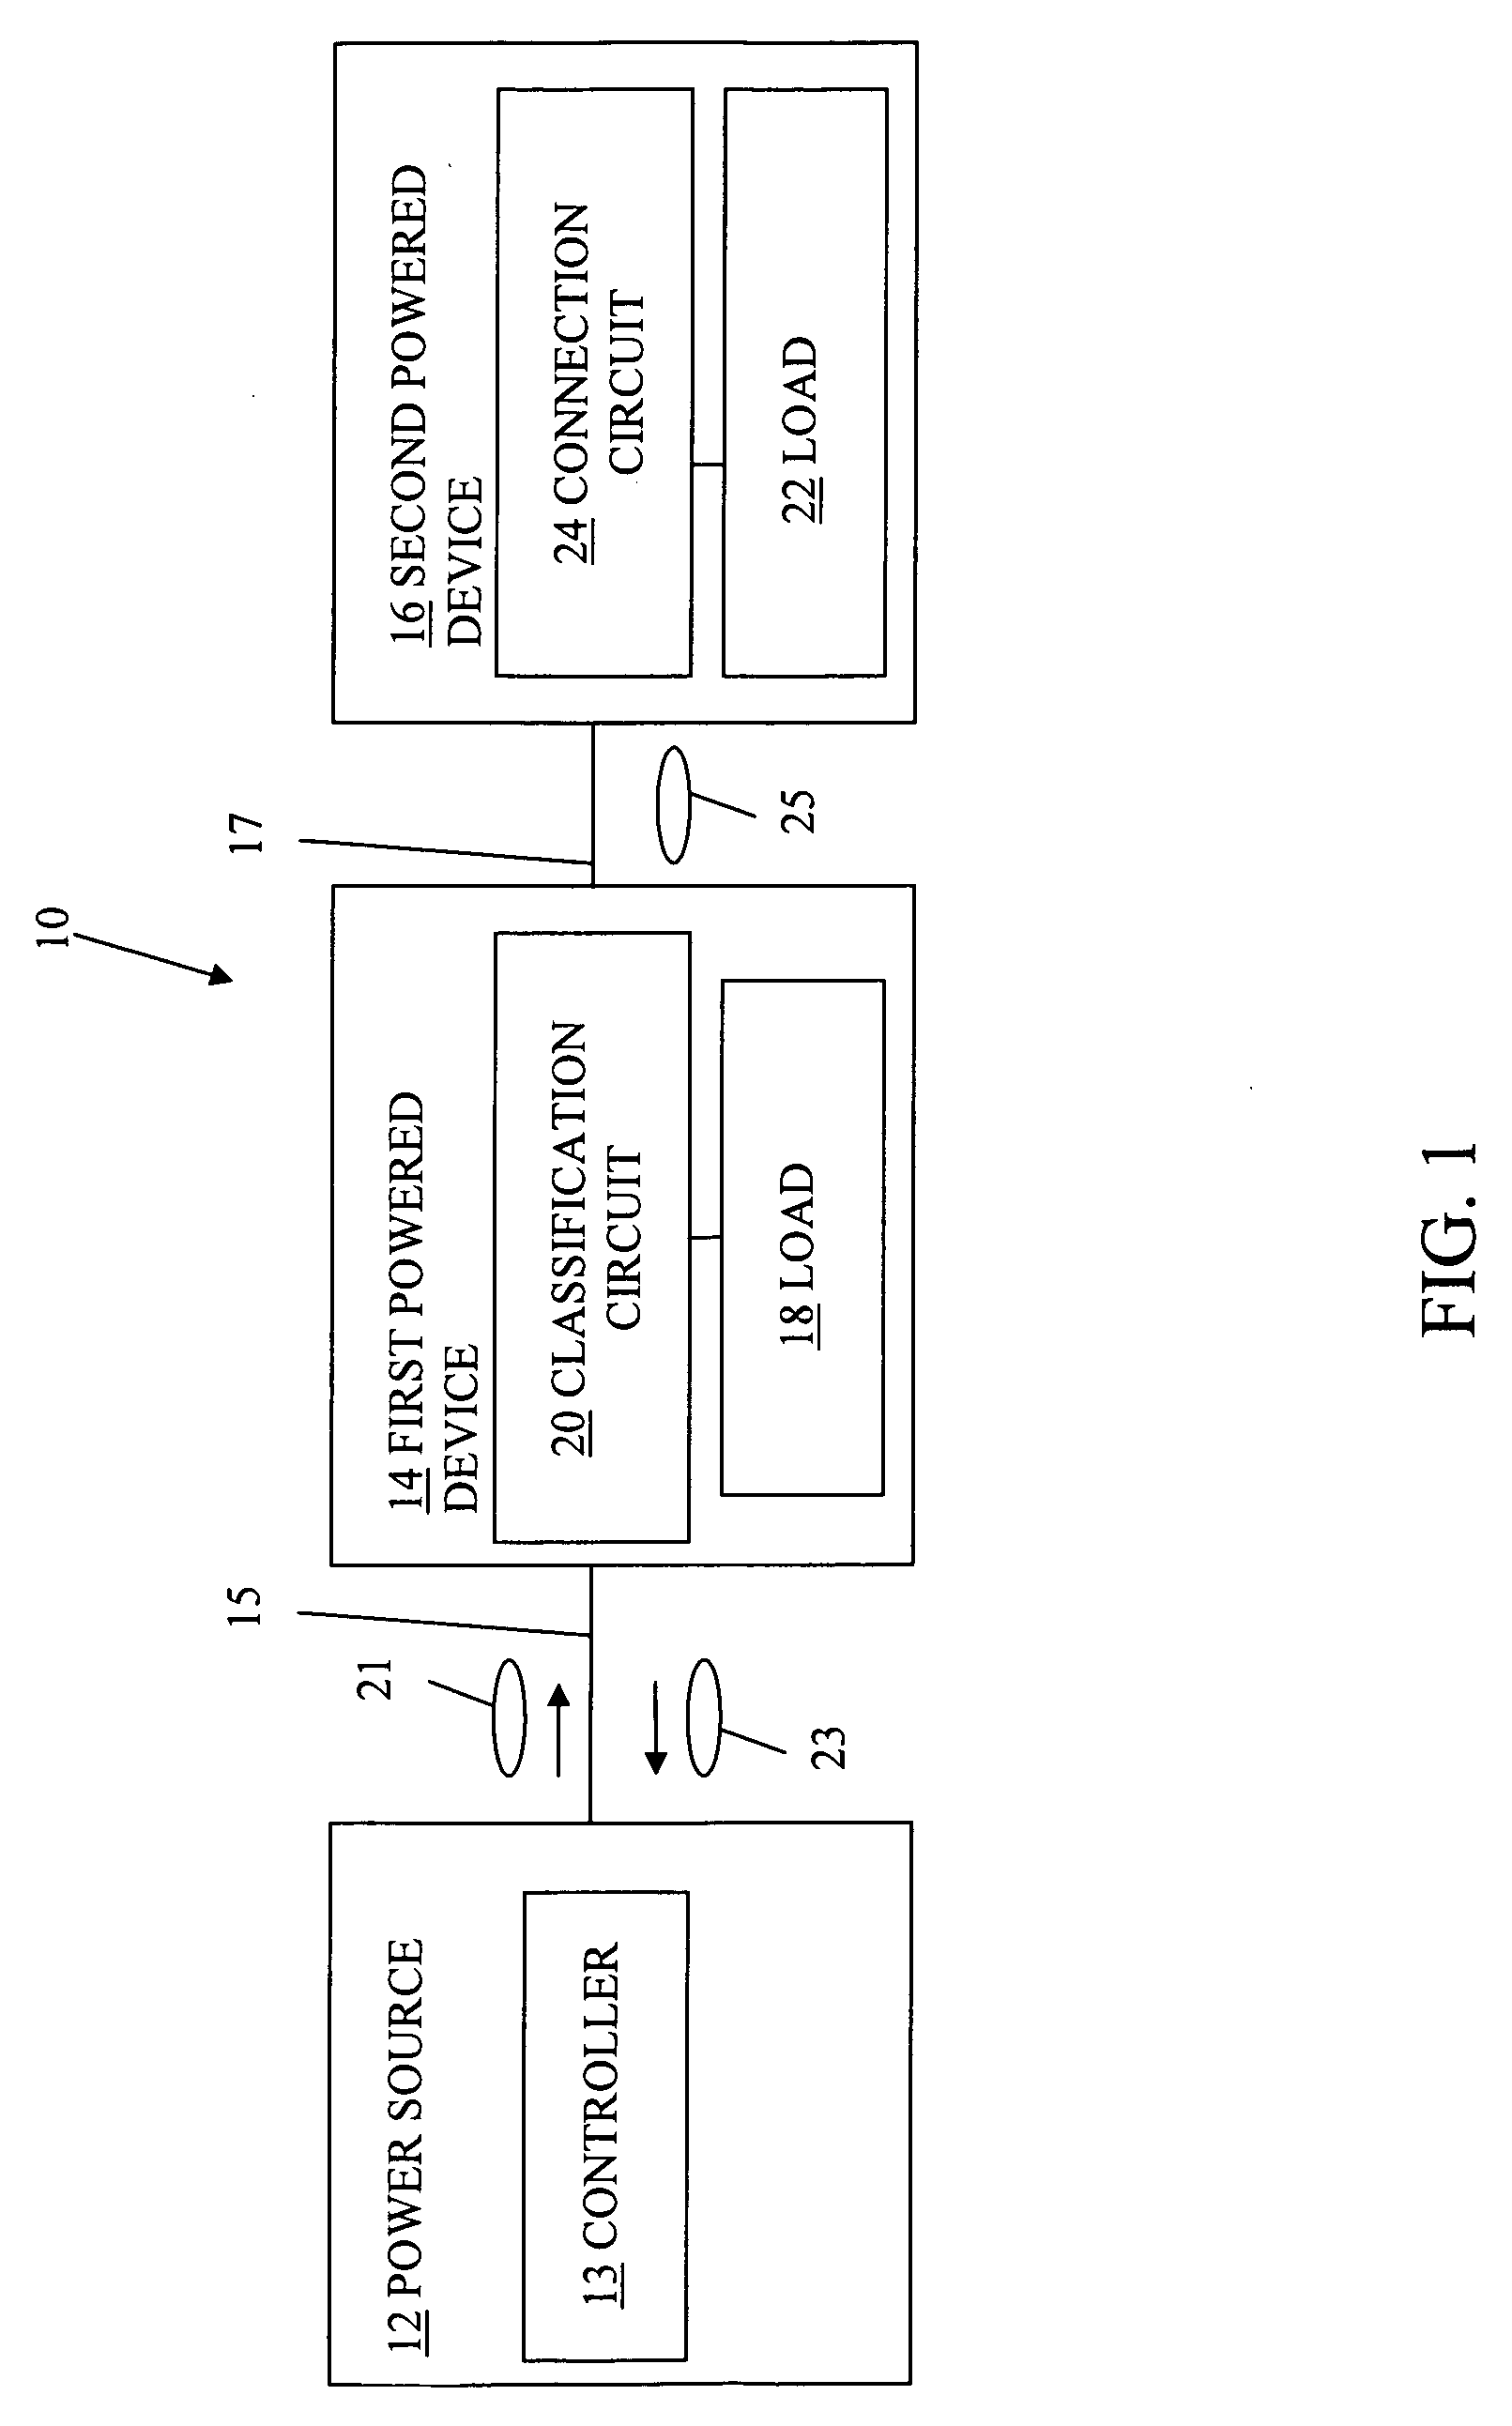 Method and apparatus for changing power class for a powered device